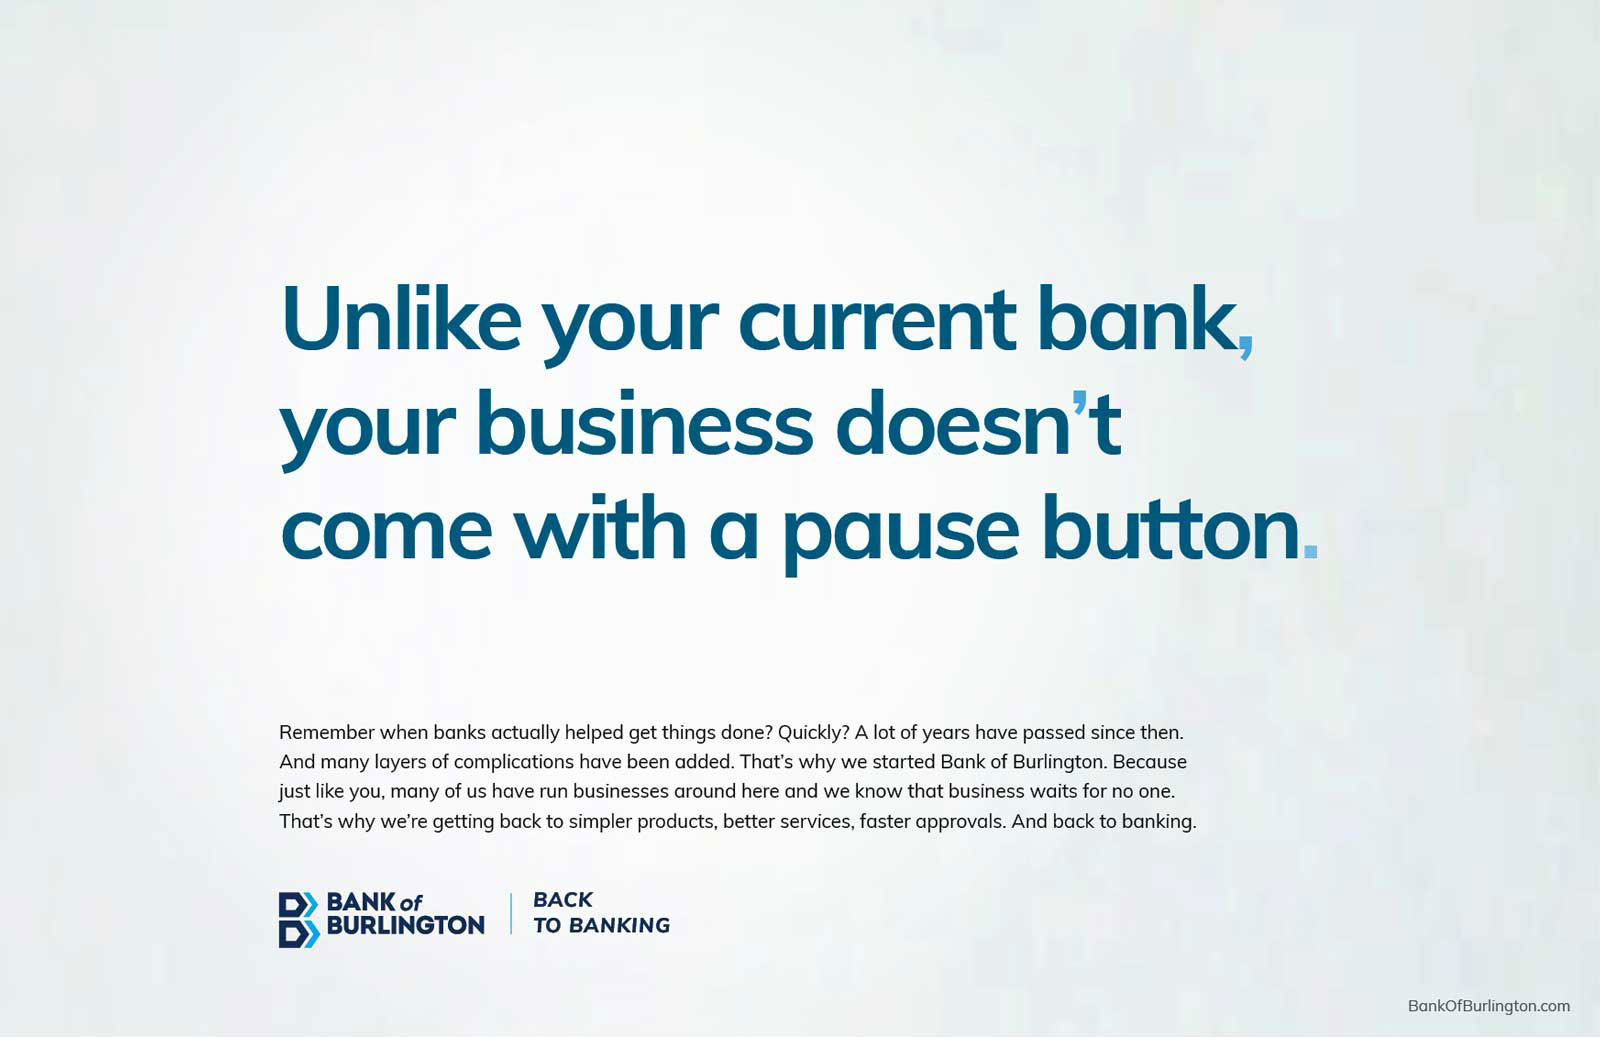 Bank of Burlington - Your business doesn't come with a pause button.